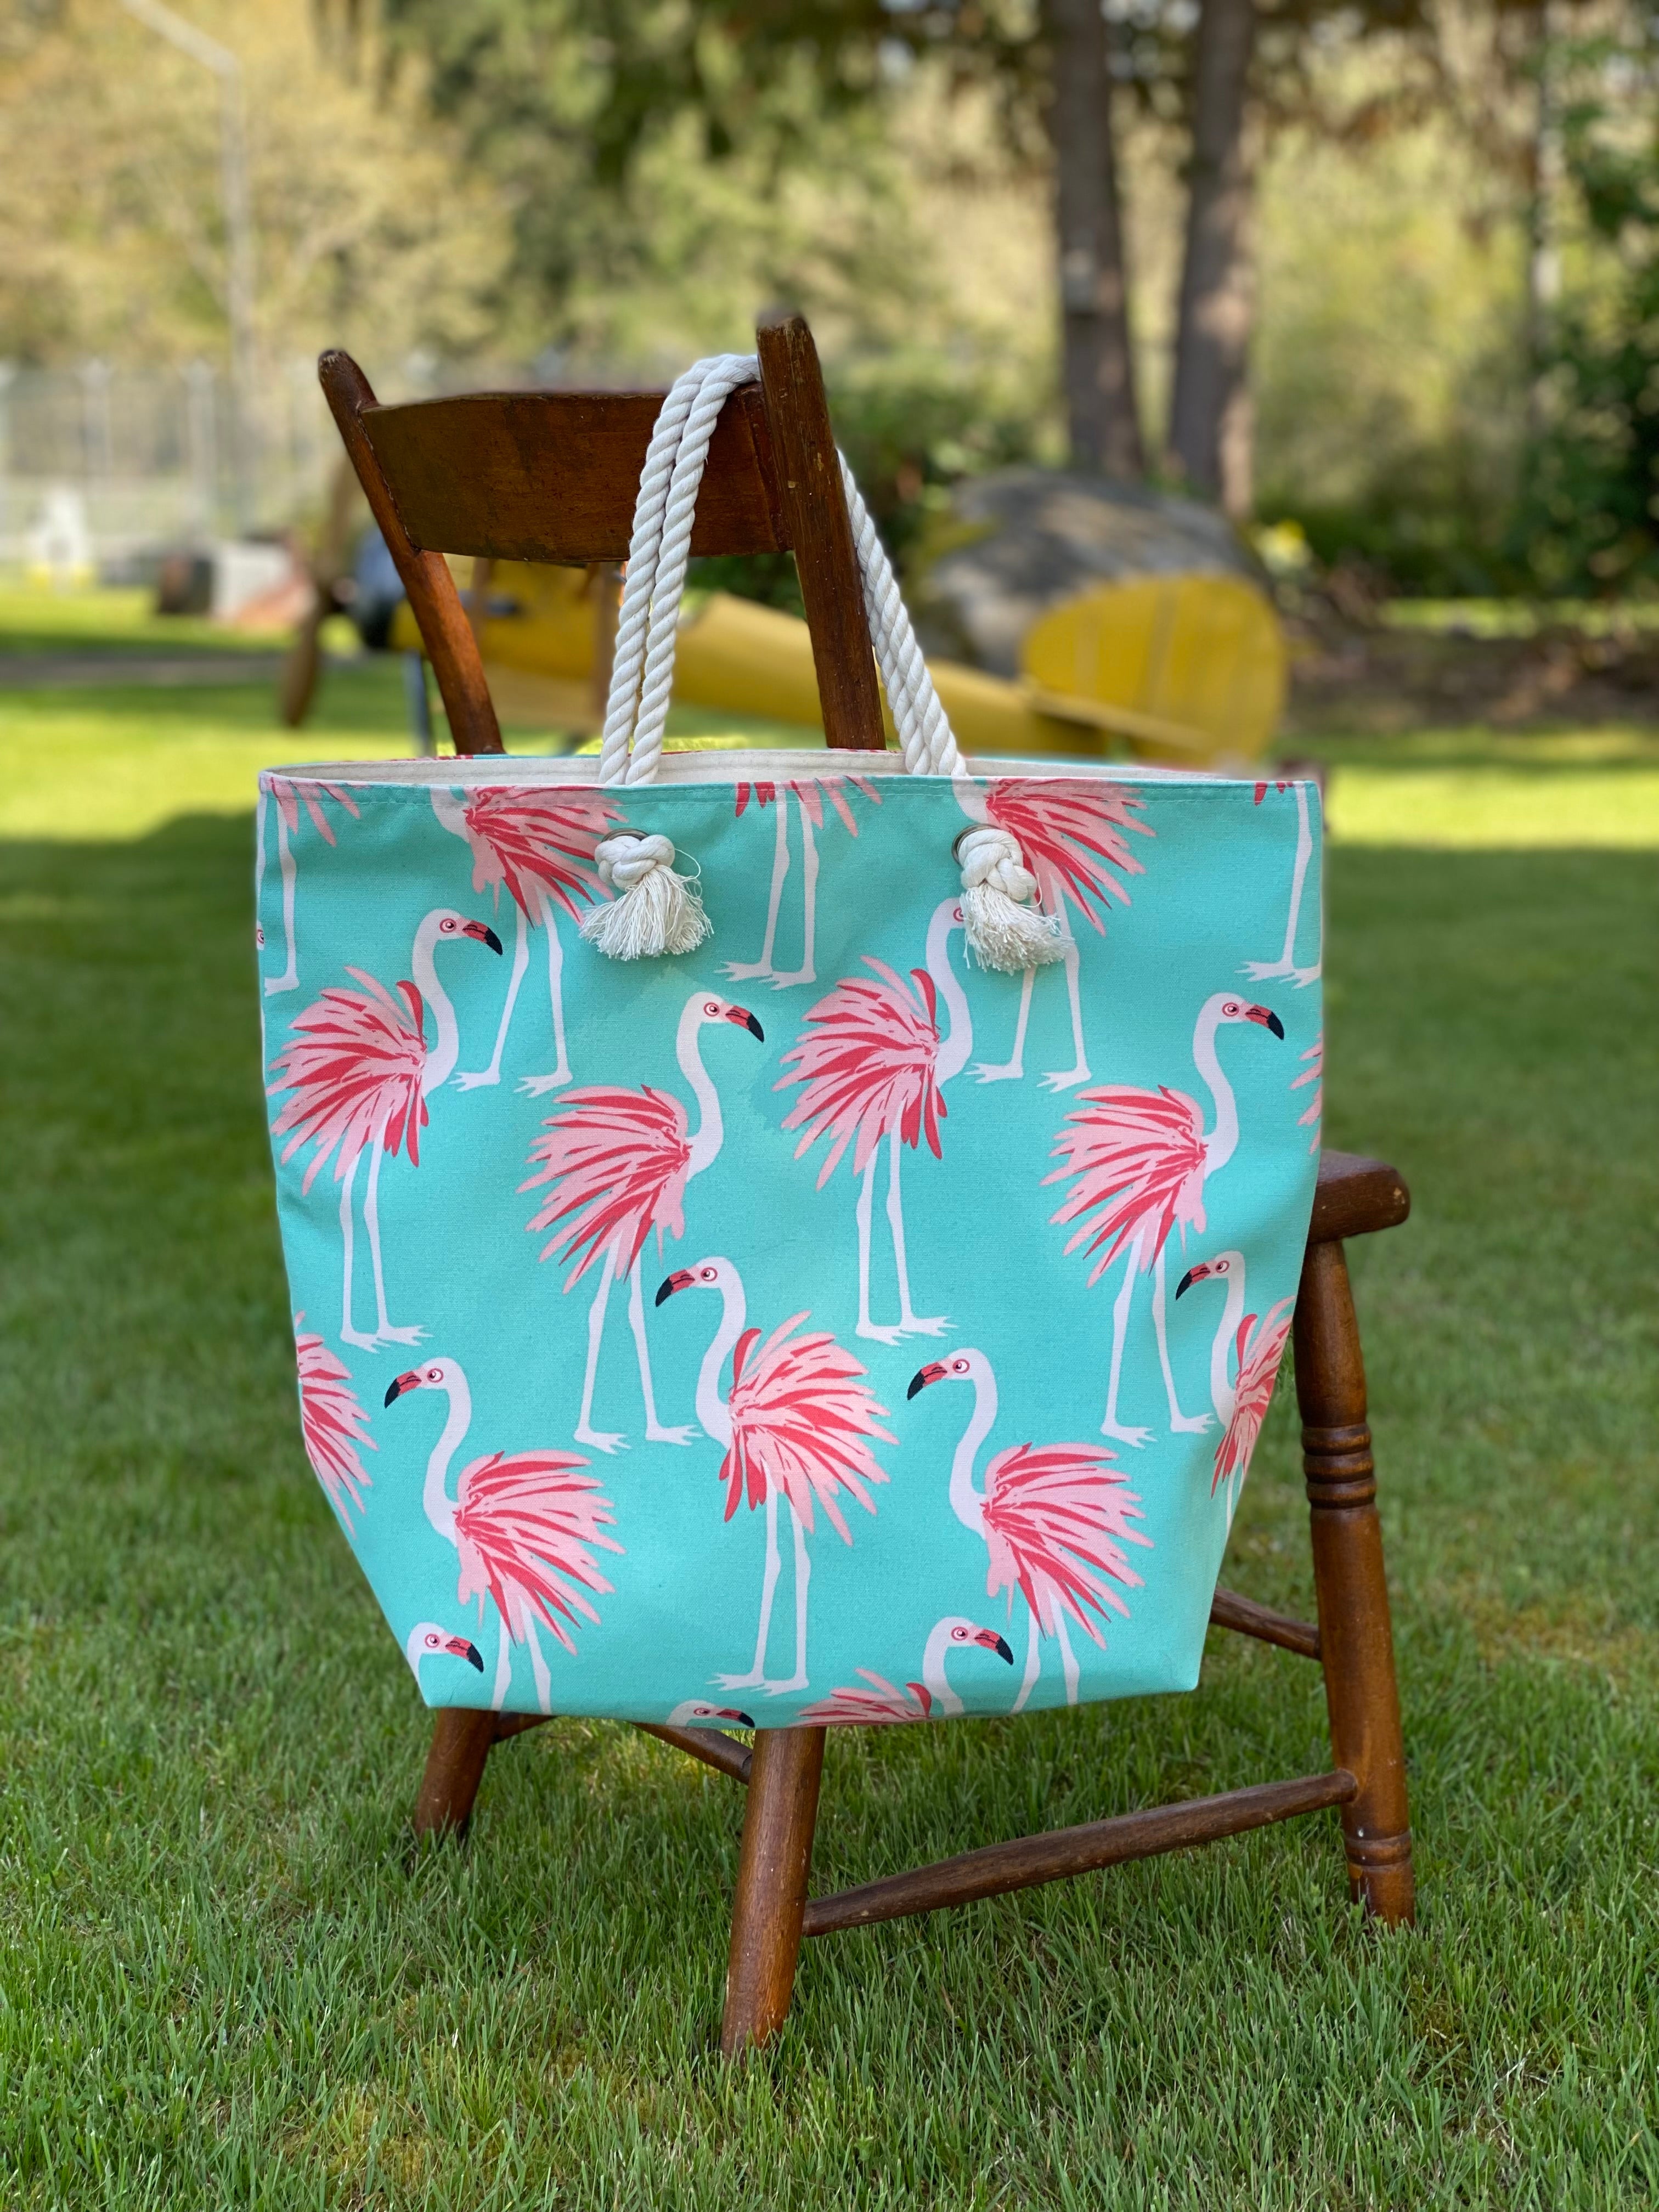 Kohls flamingo insulated polyester reusable shopping/lunch/beach/picnic  tote bag | eBay